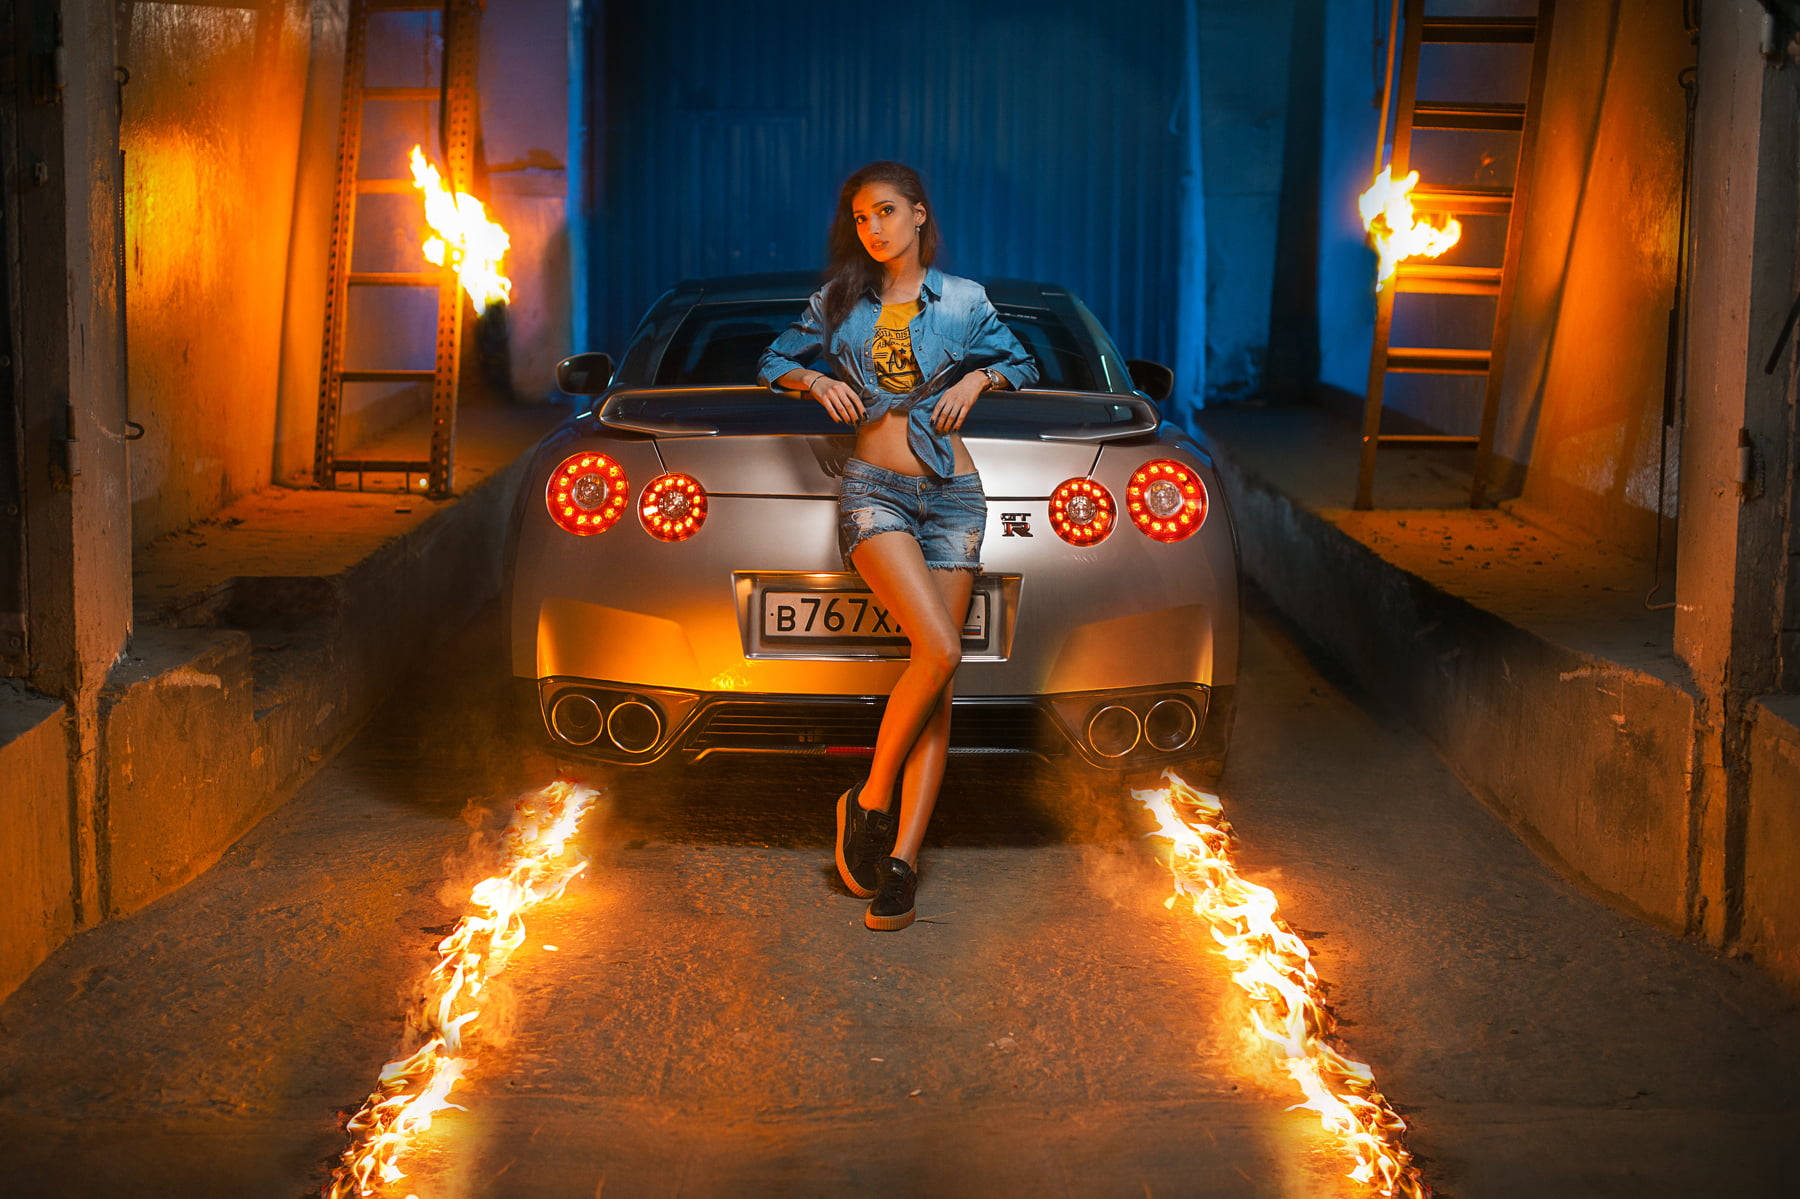 Fire Car In Garage With Woman Background